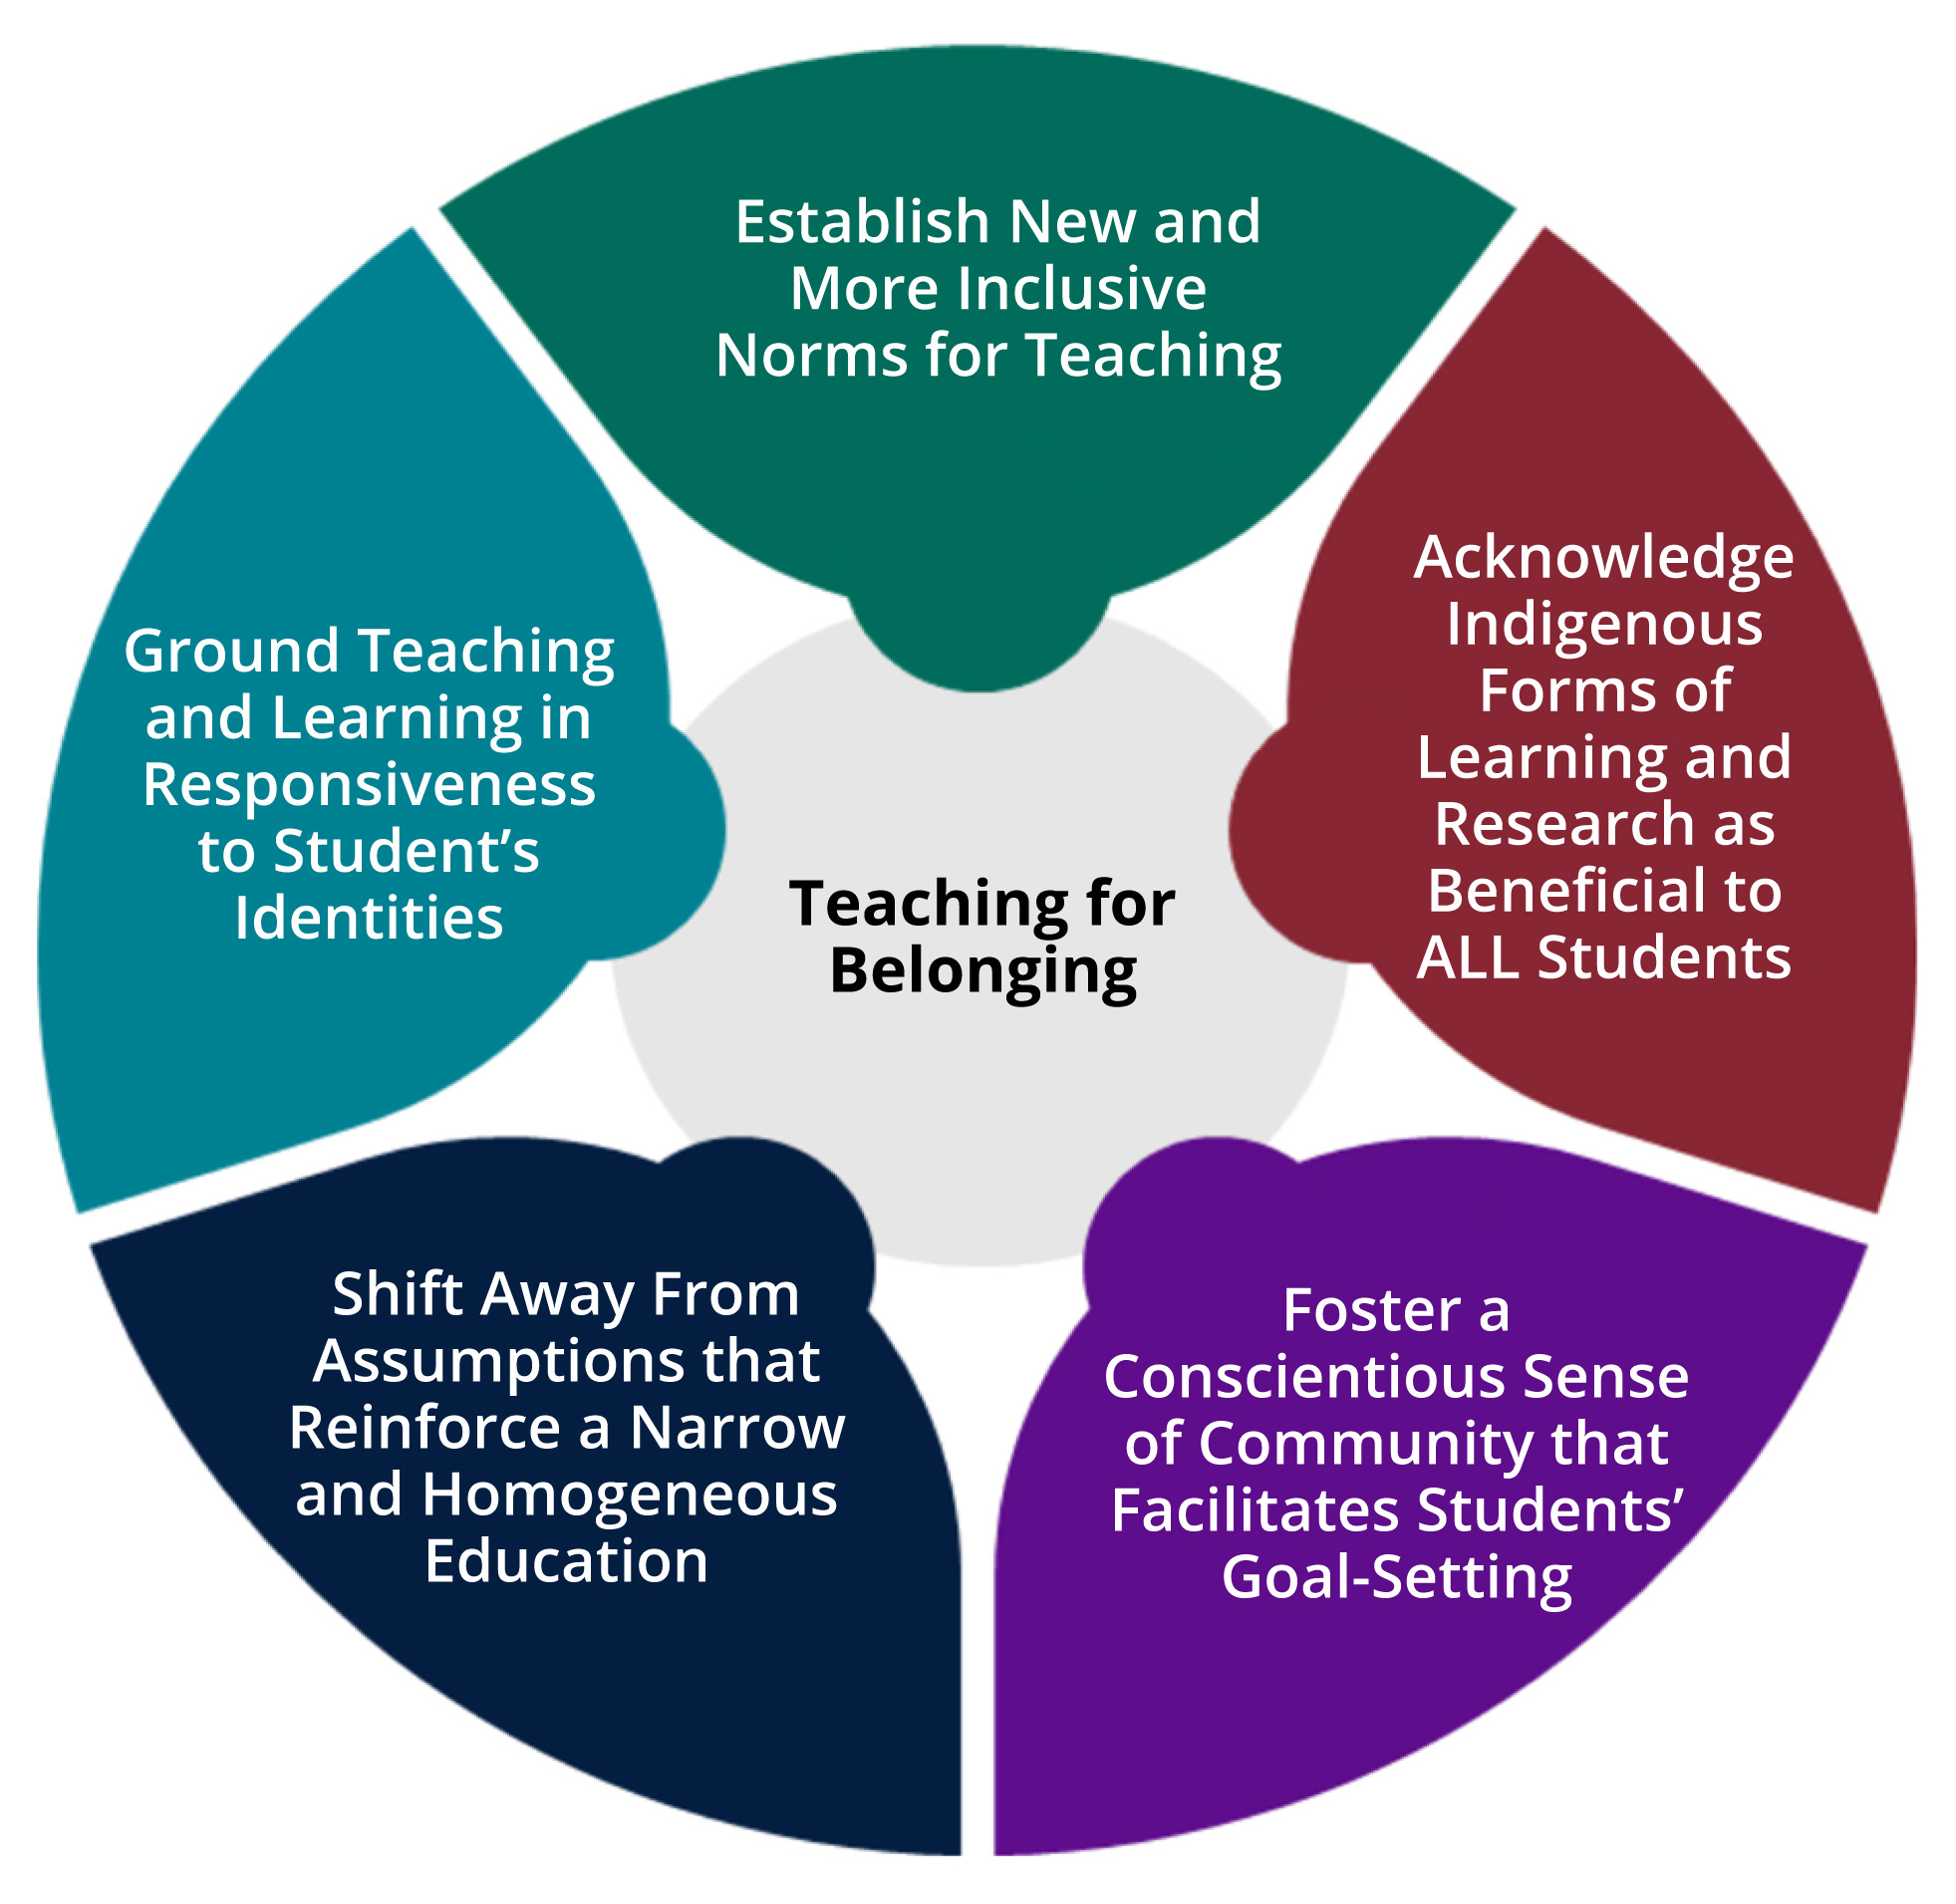 Teaching for belonging is grounded in a number of theoretical components including: establishing more inclusive norms for teaching; acknowledging Indigenous forms of learning and research as beneficial to all students; fostering a community that facilitates student goal setting; shifting away from assumptions that reinforce a homogeneous education; and grounding teaching and learning in responsiveness to students' identities